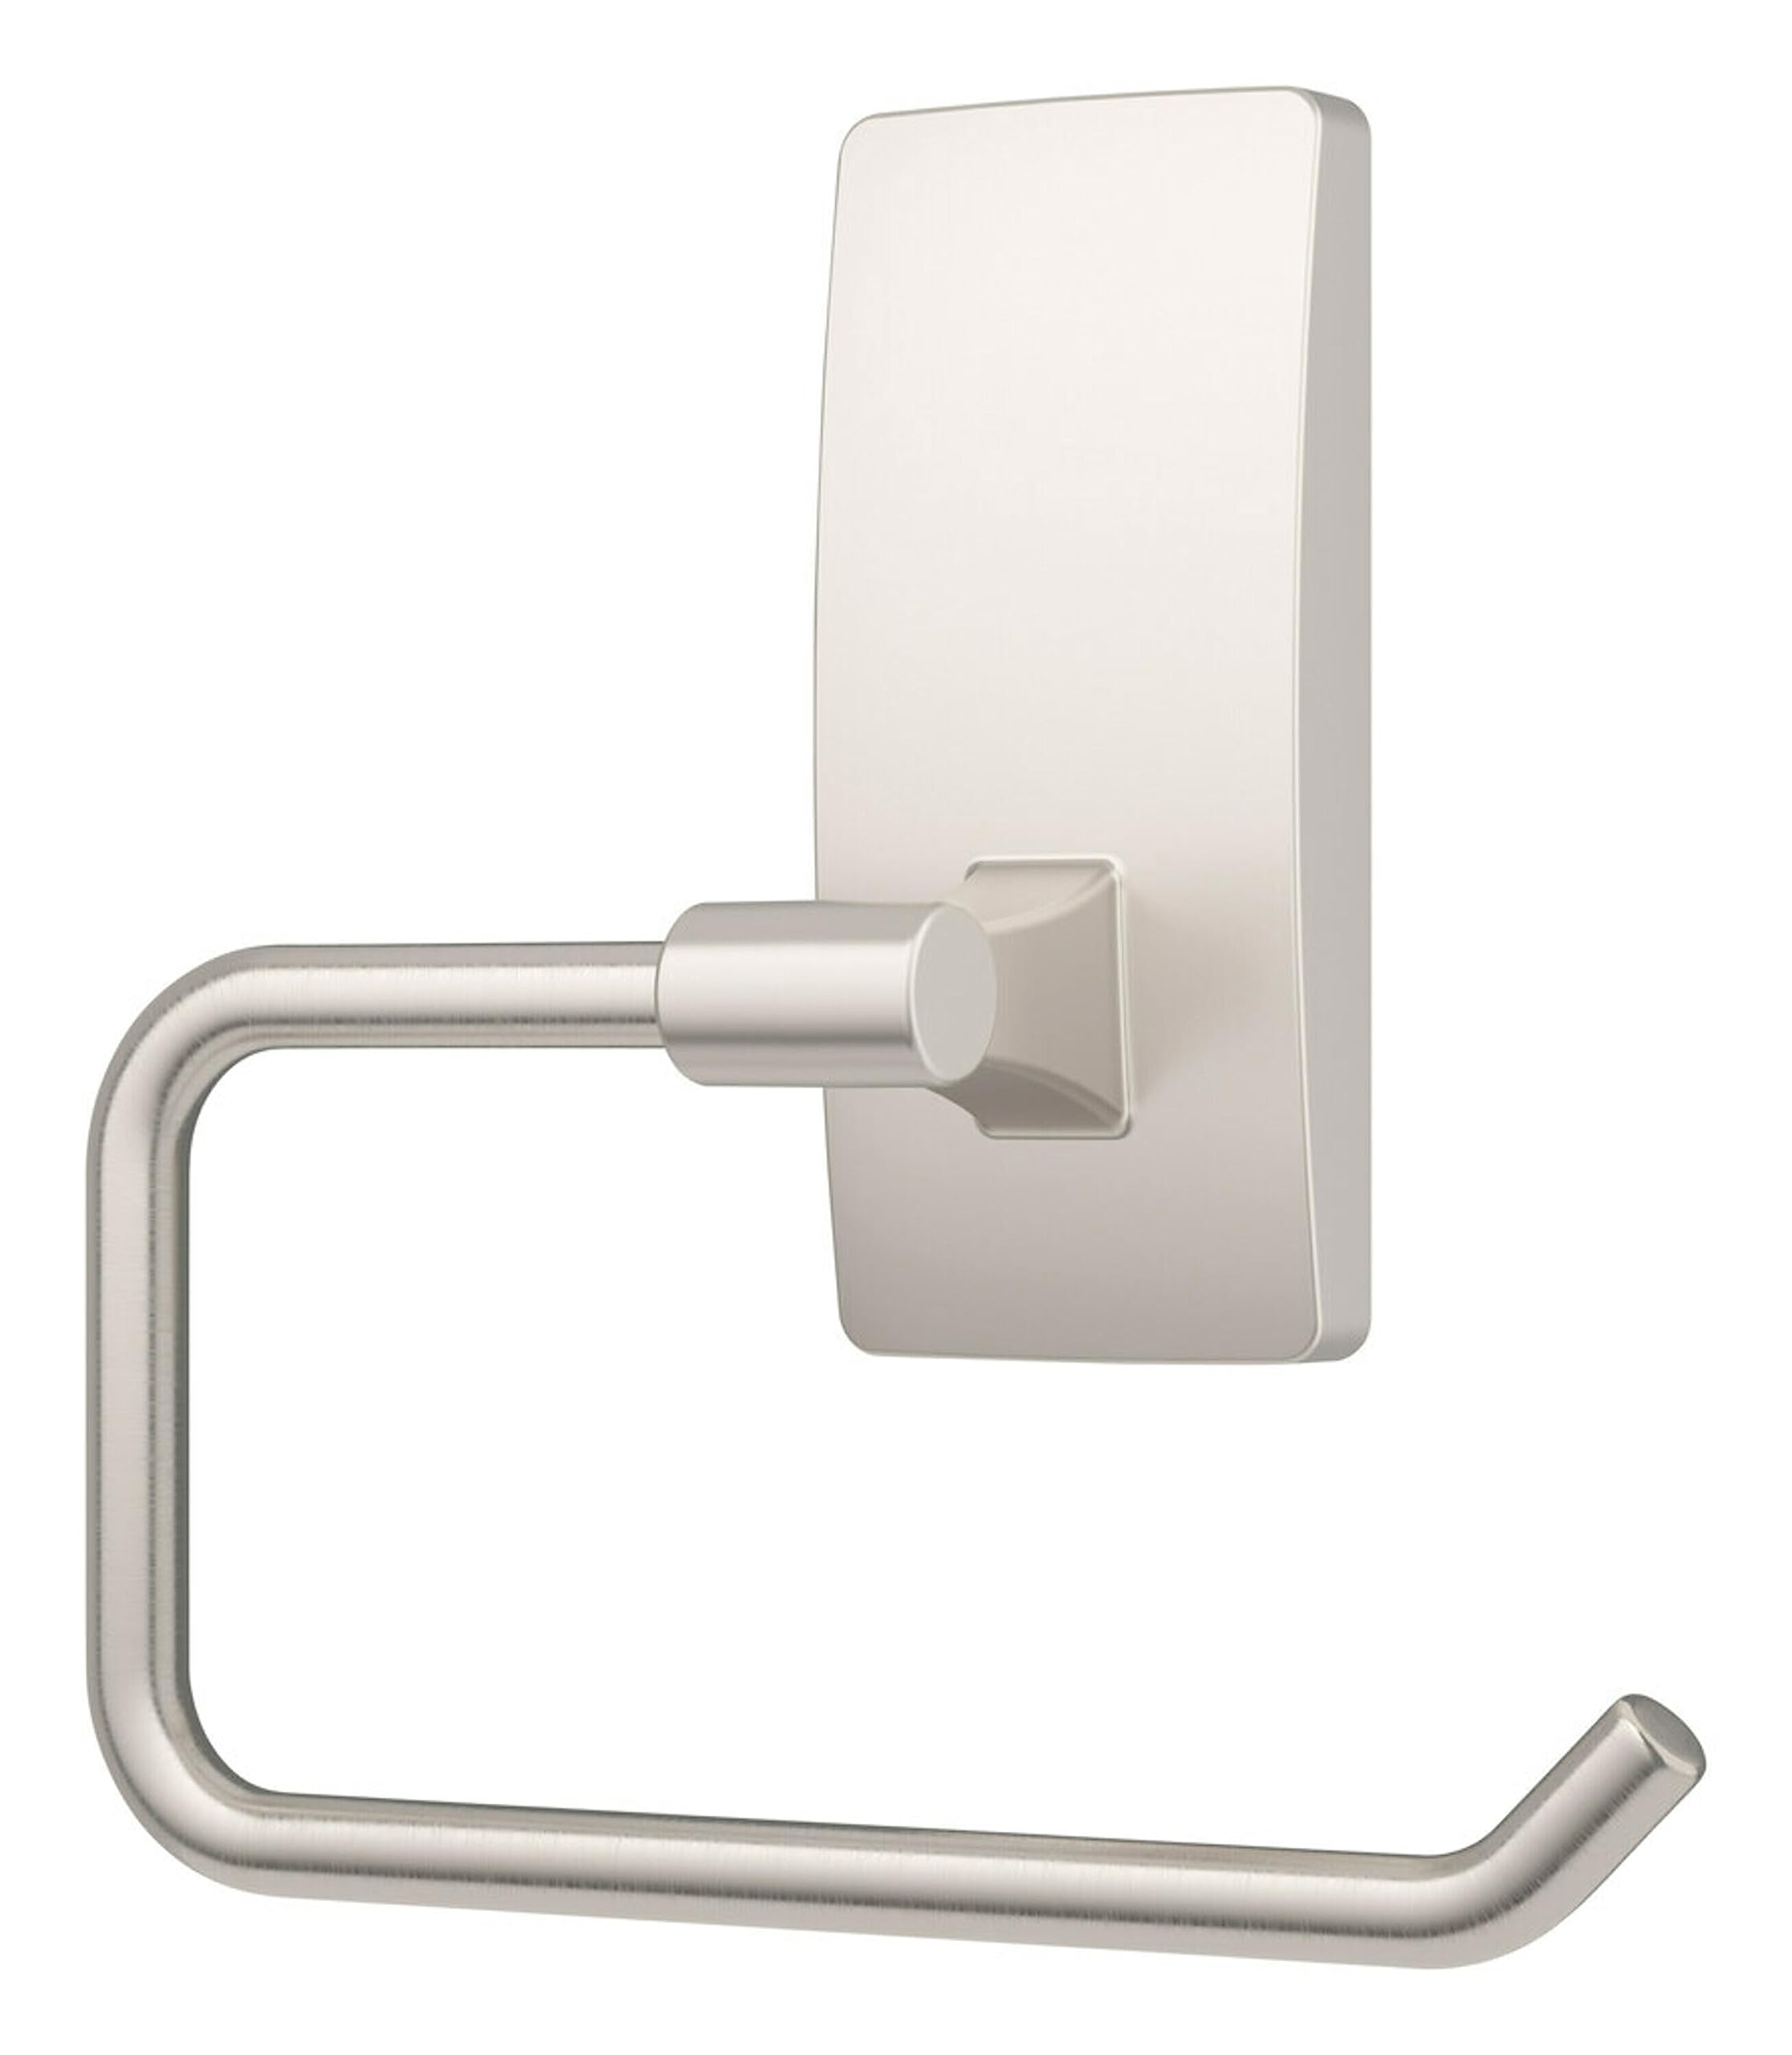 Command Toilet Paper Holder Satin Nickel with Water Resistant Command Strips, Rust Resistant Bathroom Organizer